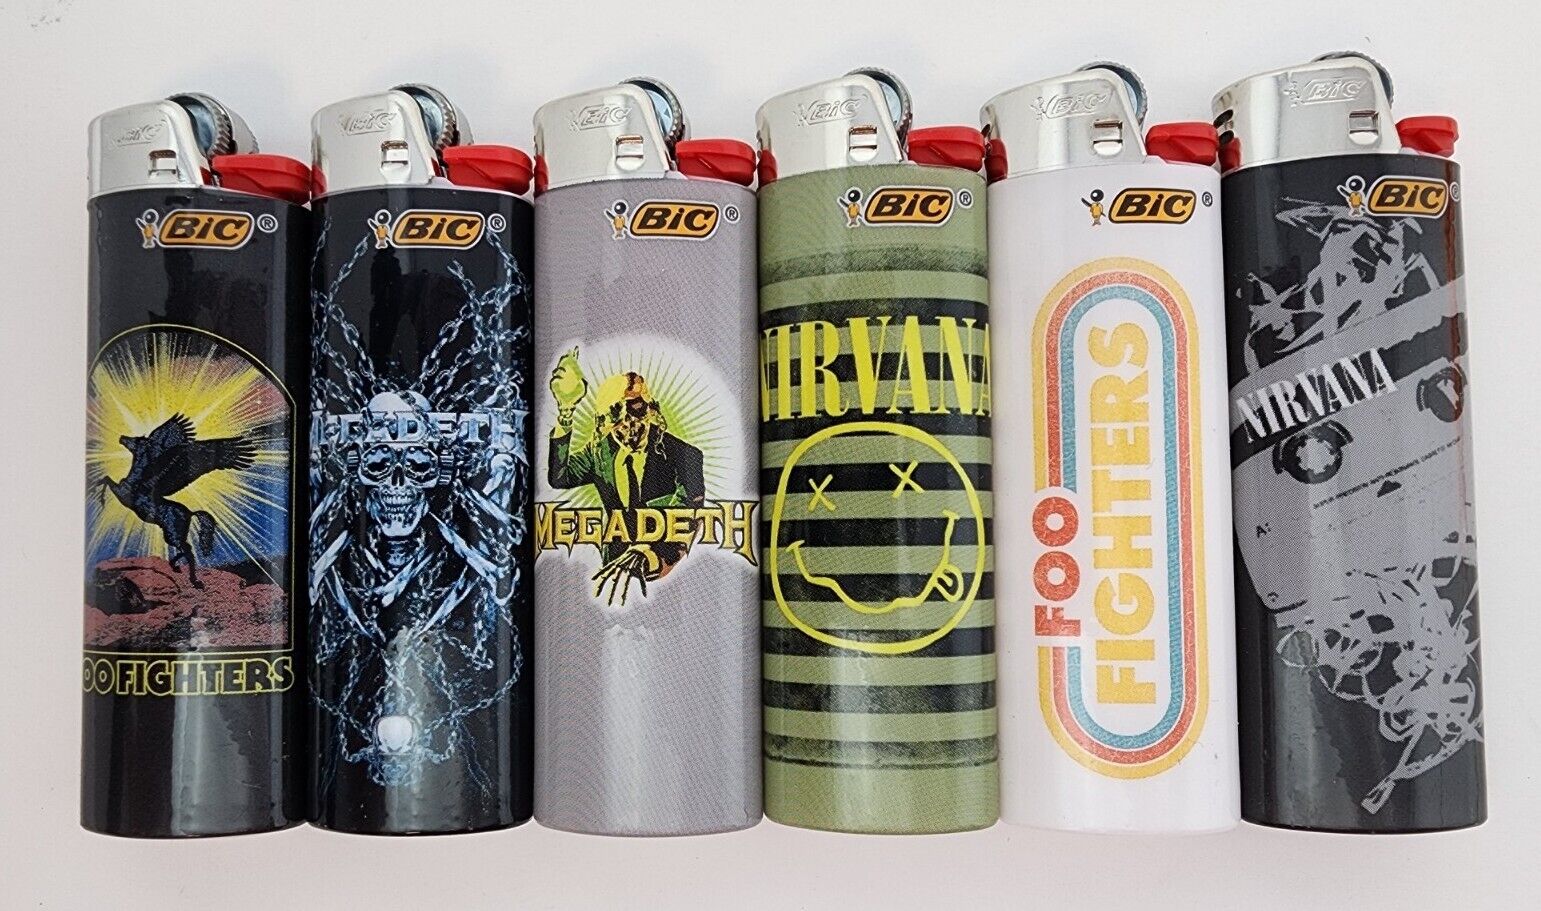 Rock Band Royalty BIC Full Size Lighters 6pc set- Nirvana-Megadeath-Foo Fighters